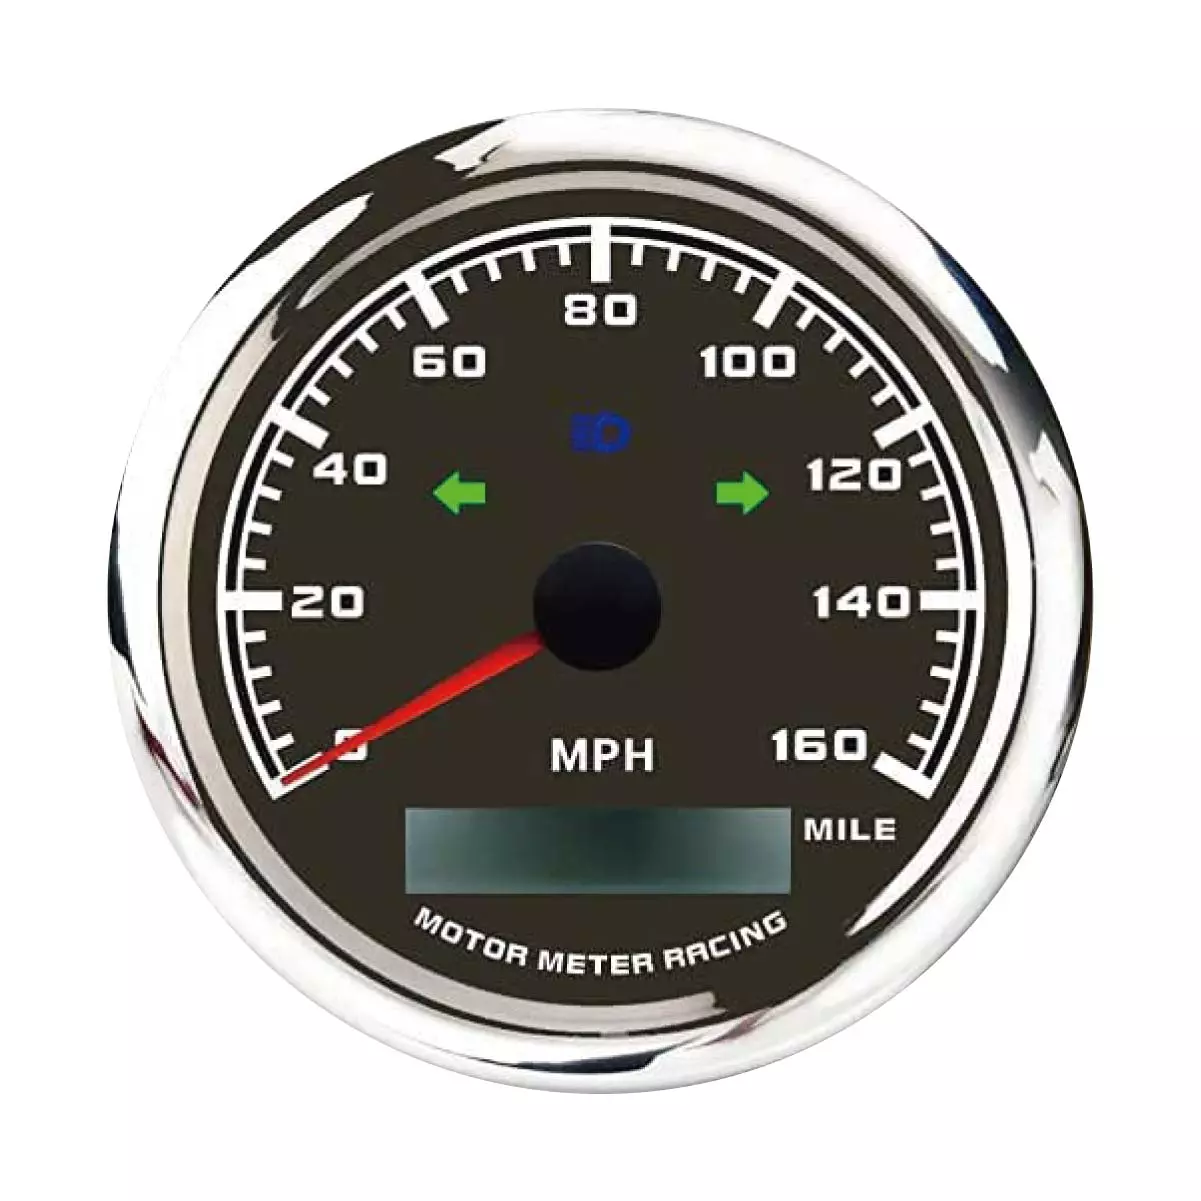 MOTOR METER RACING W Pro GPS Speedometer Odometer Waterproof for Car Boat Motorcycle Black with Turn Signal High Beam 160 Mph White LED GPS Sensor Included